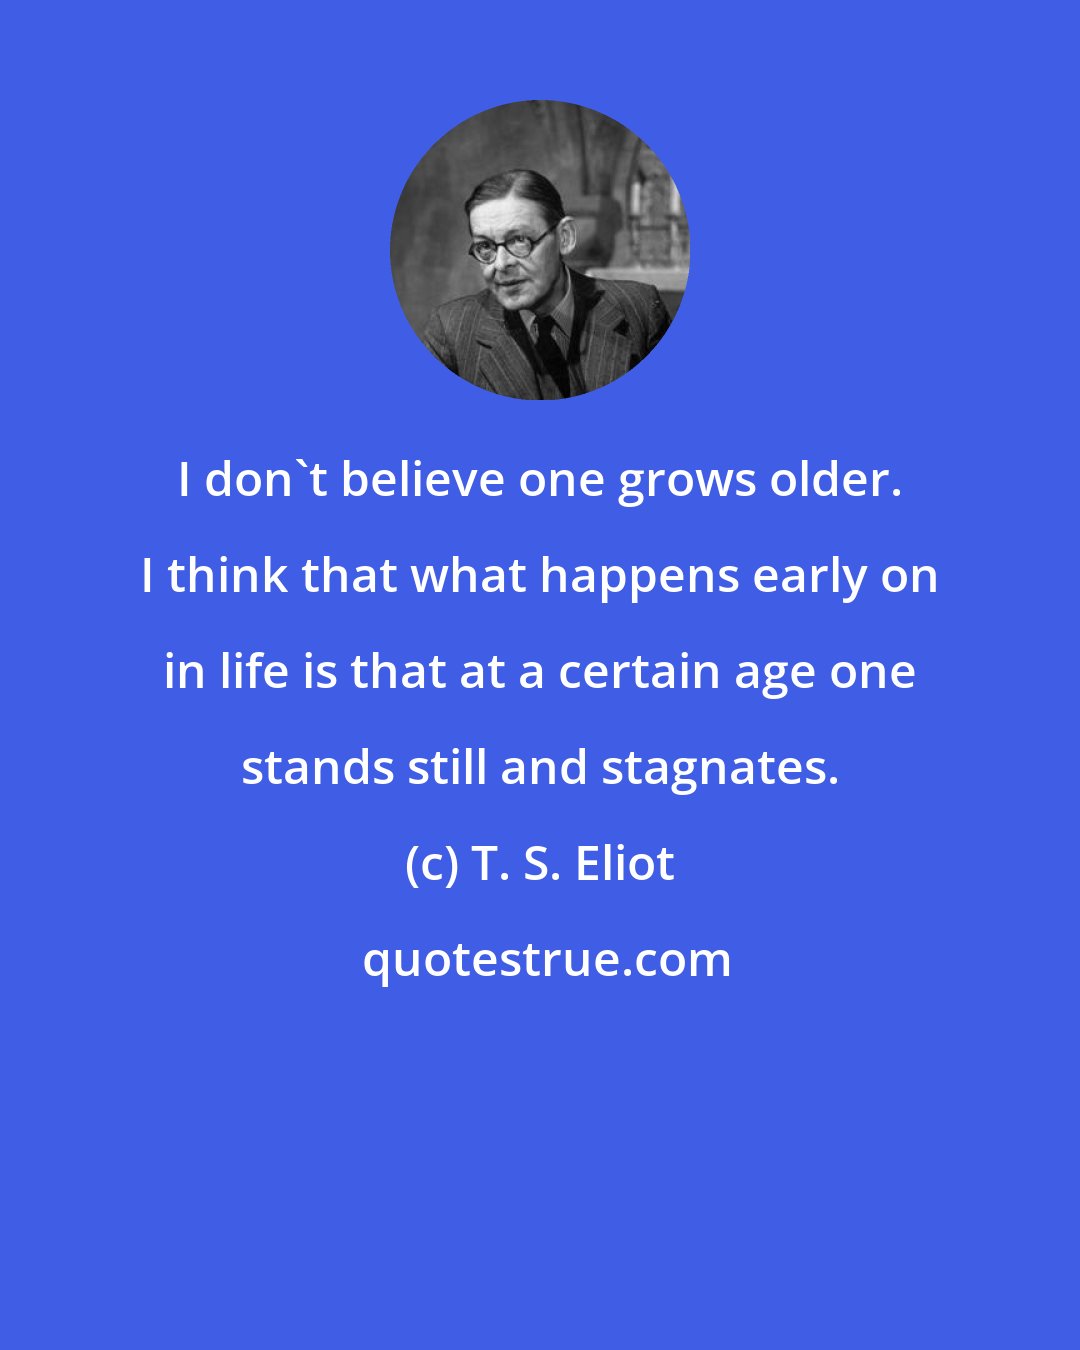 T. S. Eliot: I don't believe one grows older. I think that what happens early on in life is that at a certain age one stands still and stagnates.